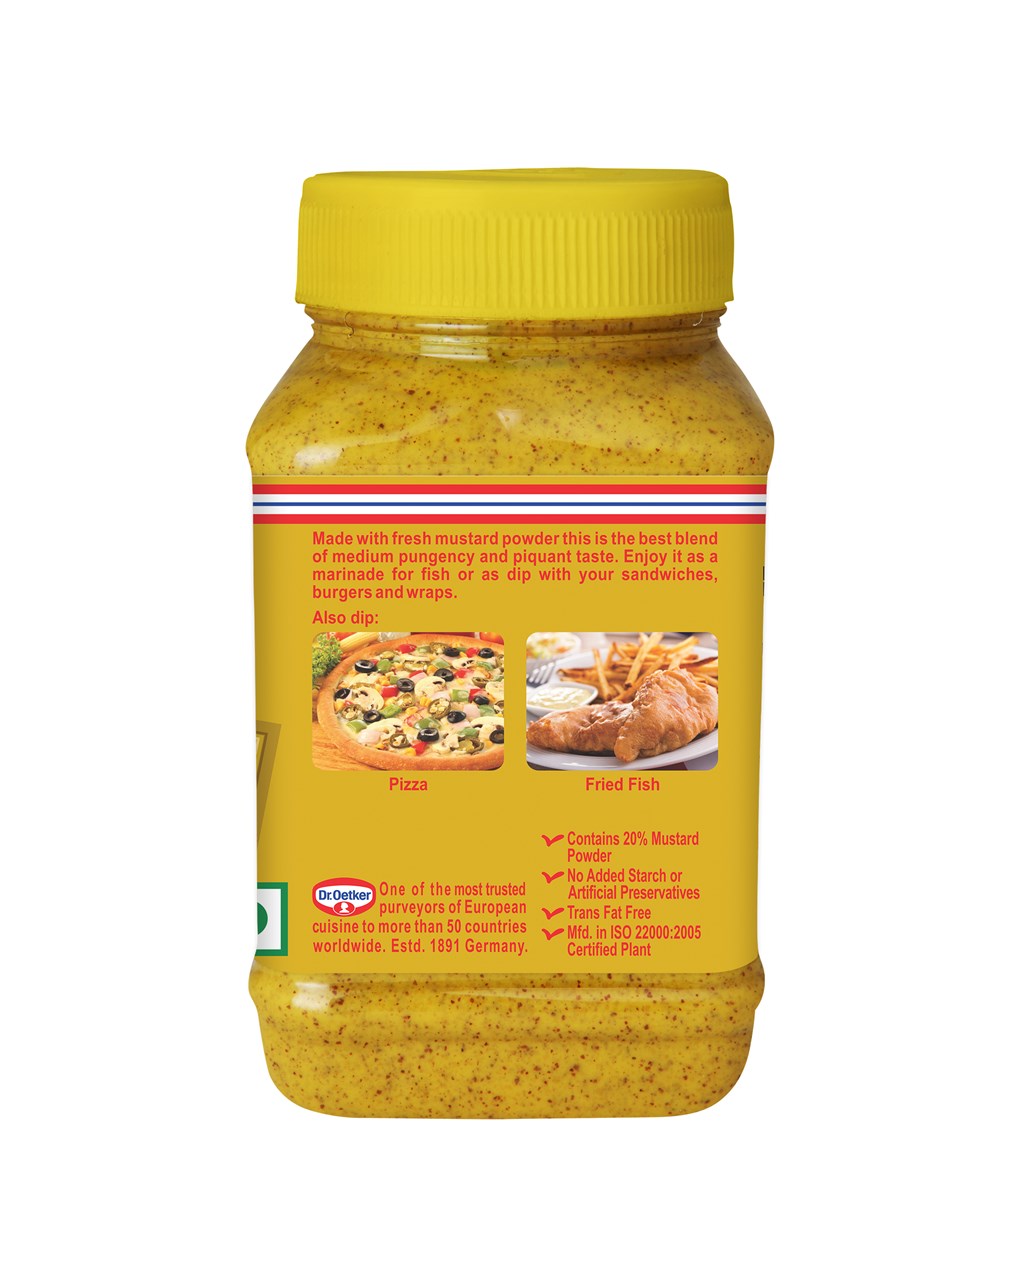 Picture of Mustard English 300g